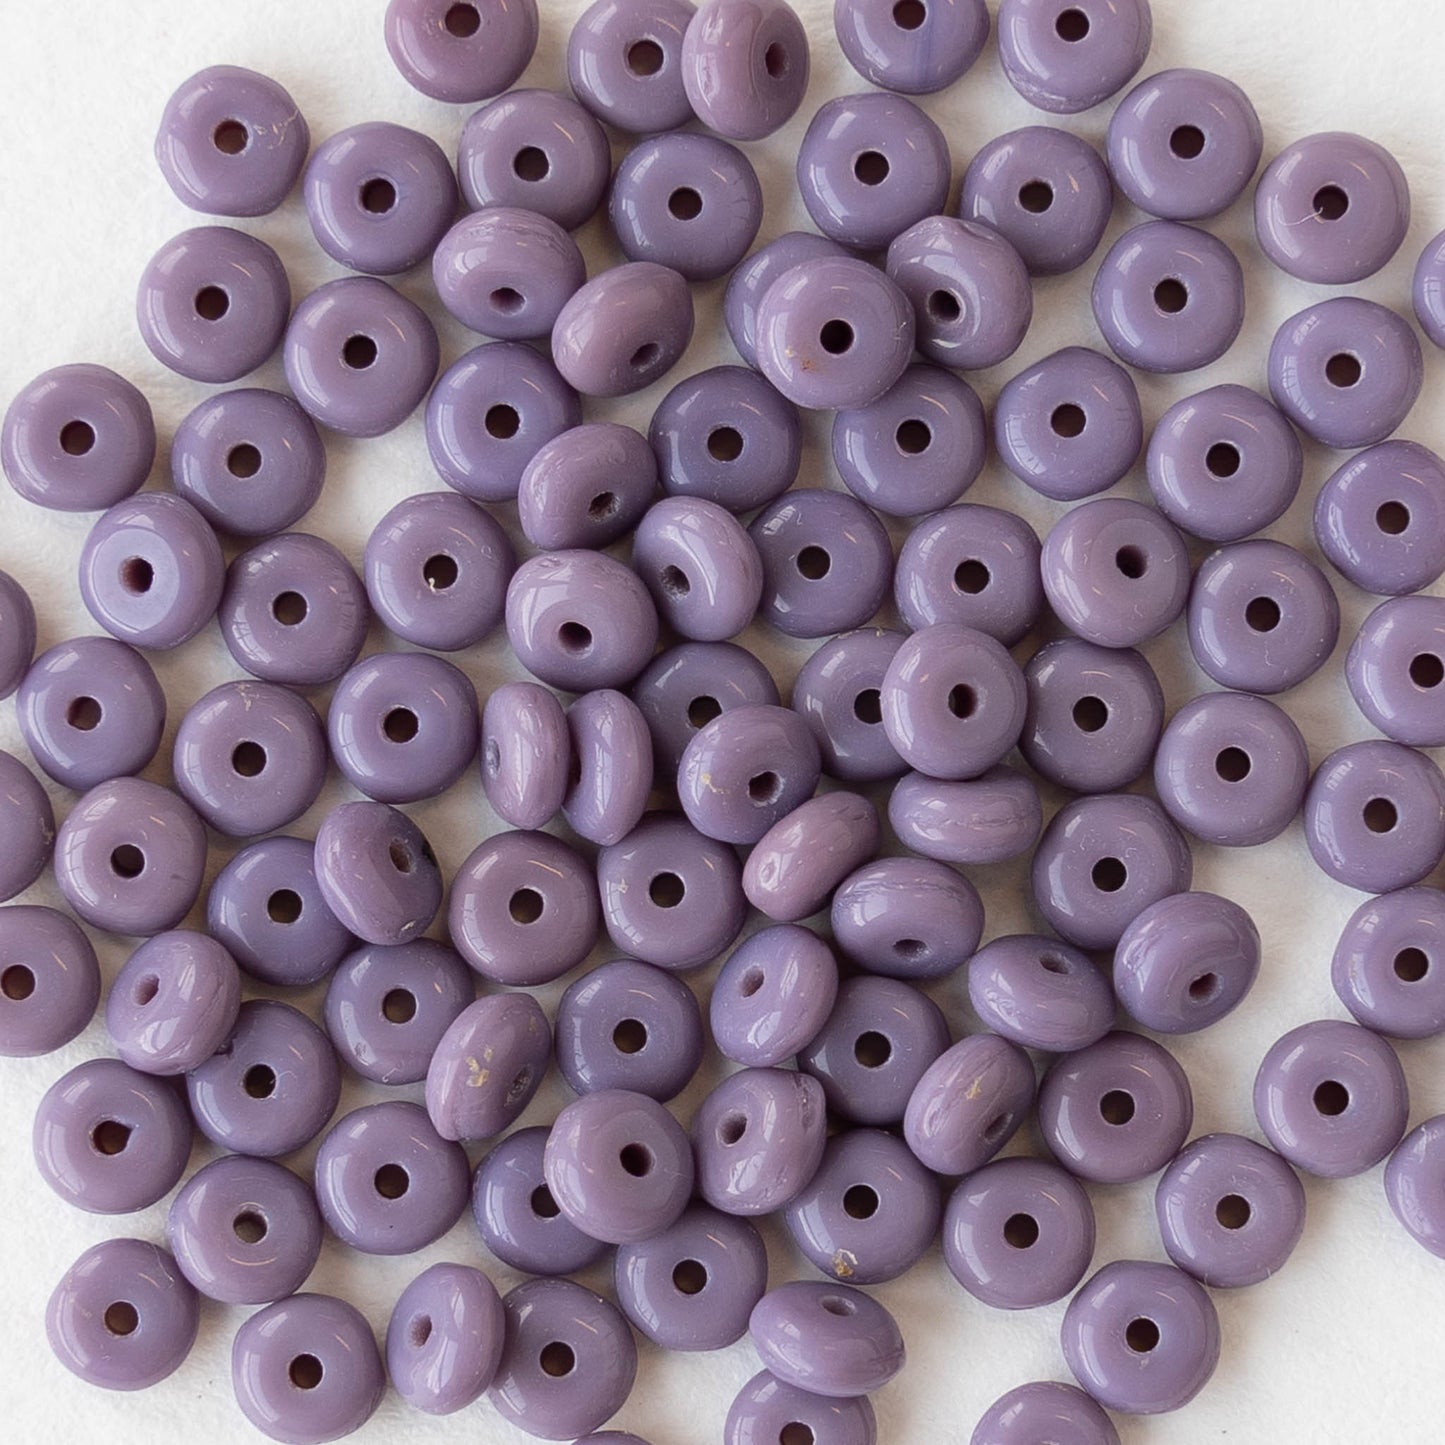 4mm Glass Rondelle Beads - Opaque Lavender - 100 Beads